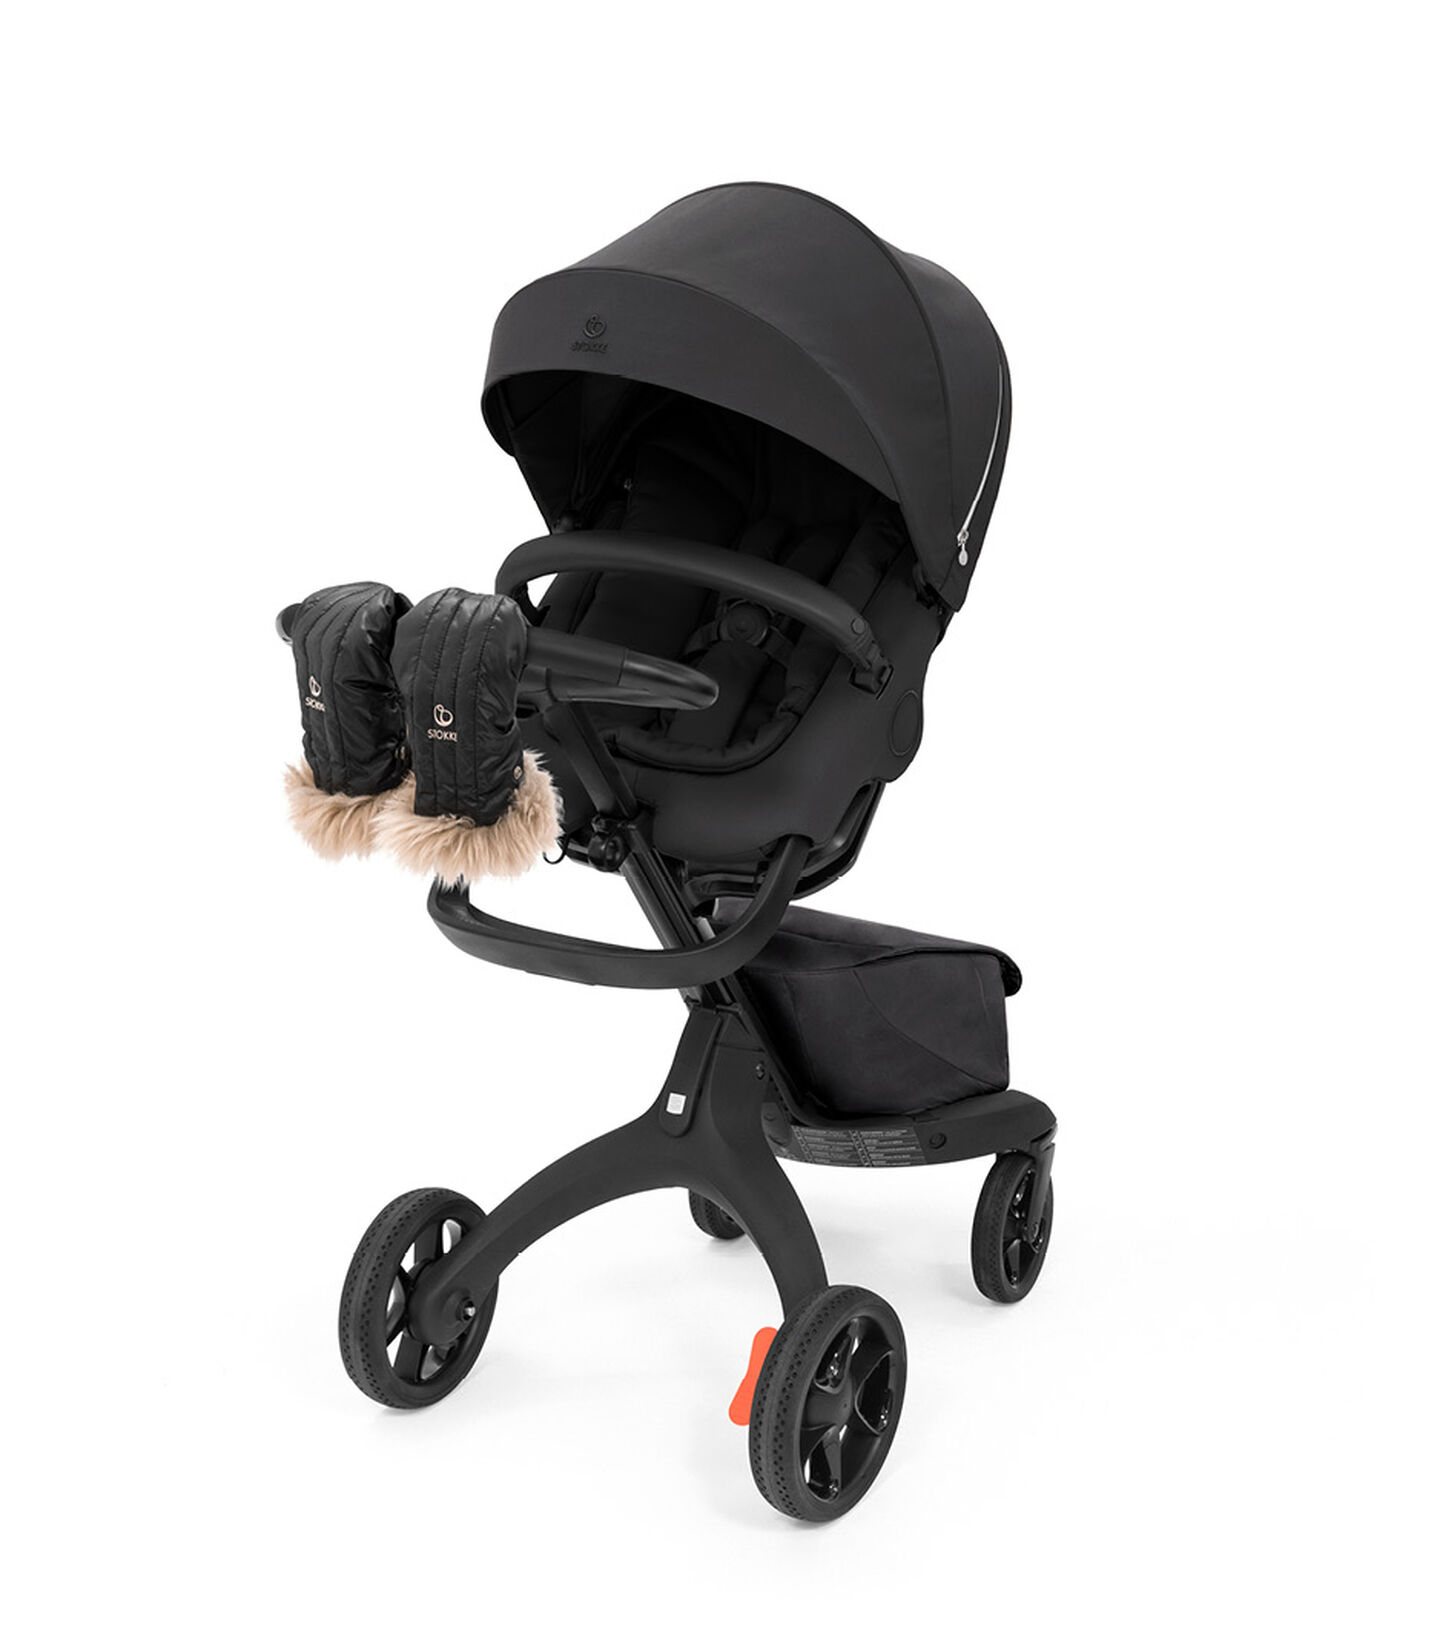 Stokke® Stroller Mittens Onyx Black, 瑪瑙黑色, mainview view 2